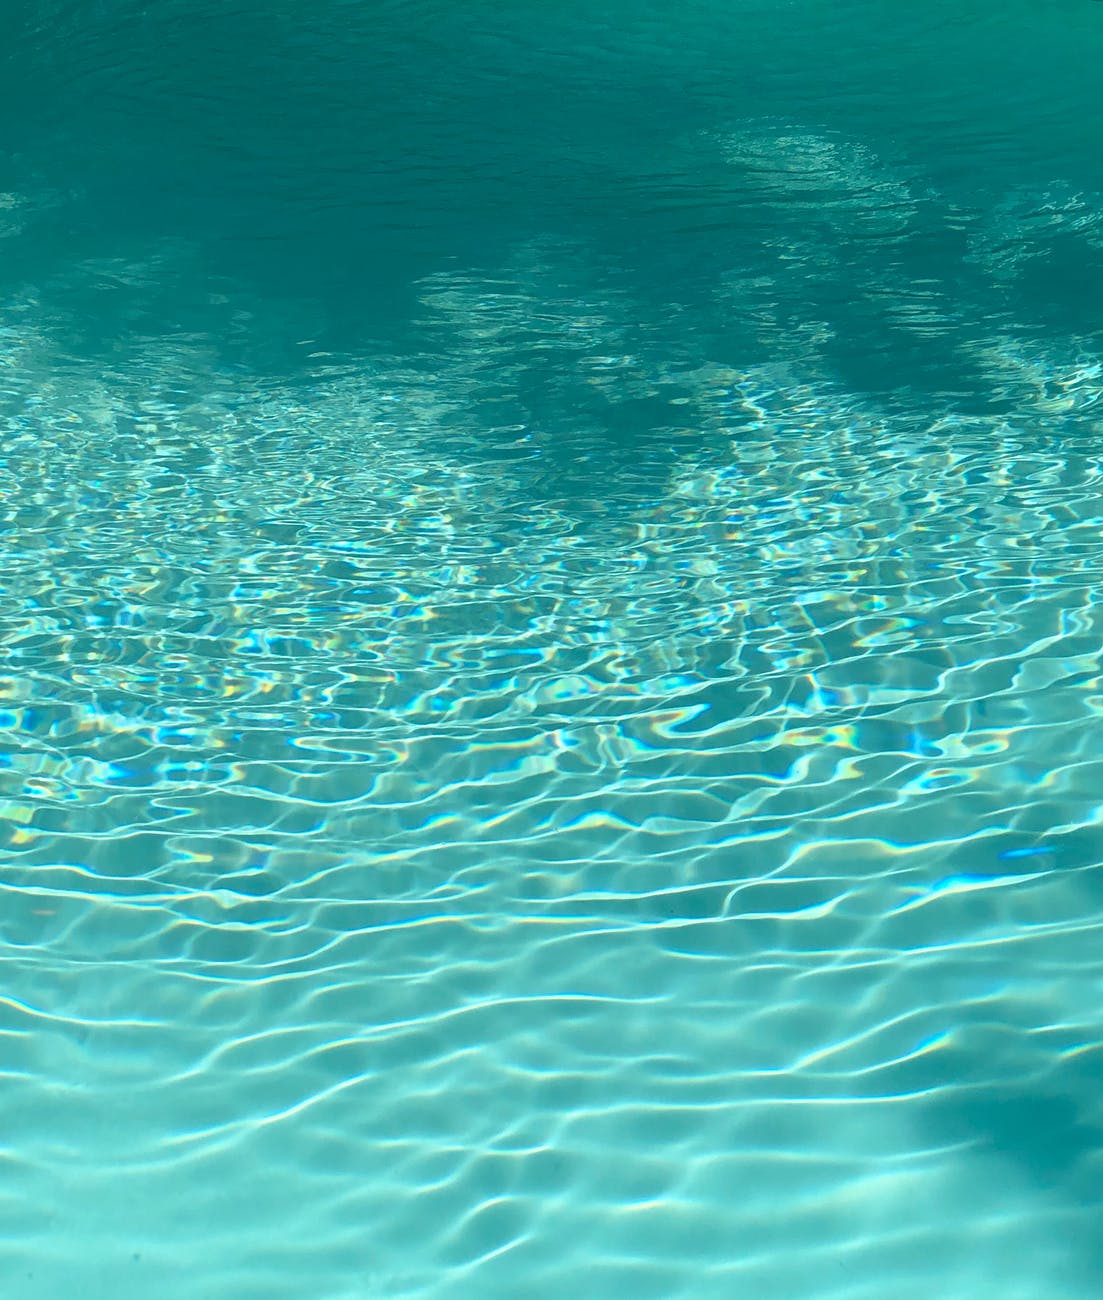 rippling water surface of swimming pool